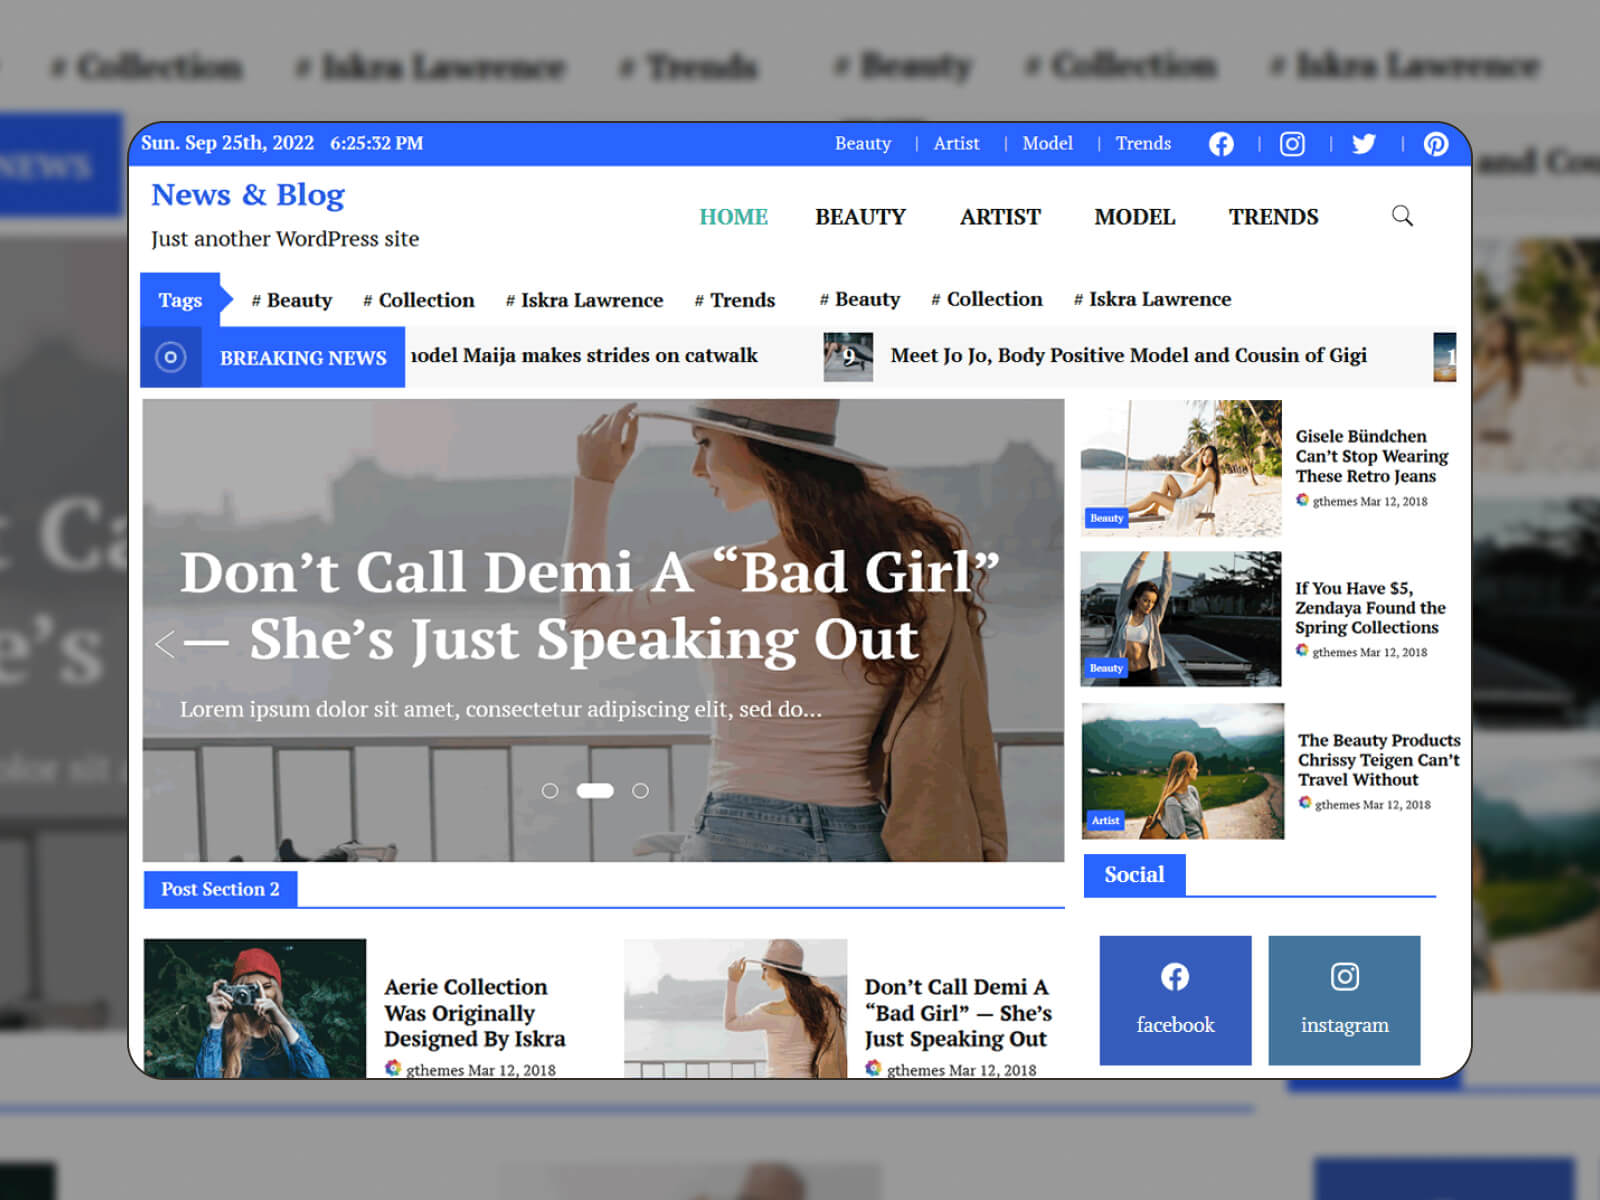 Collage of the News Blog demo page in a blue and white color scheme.